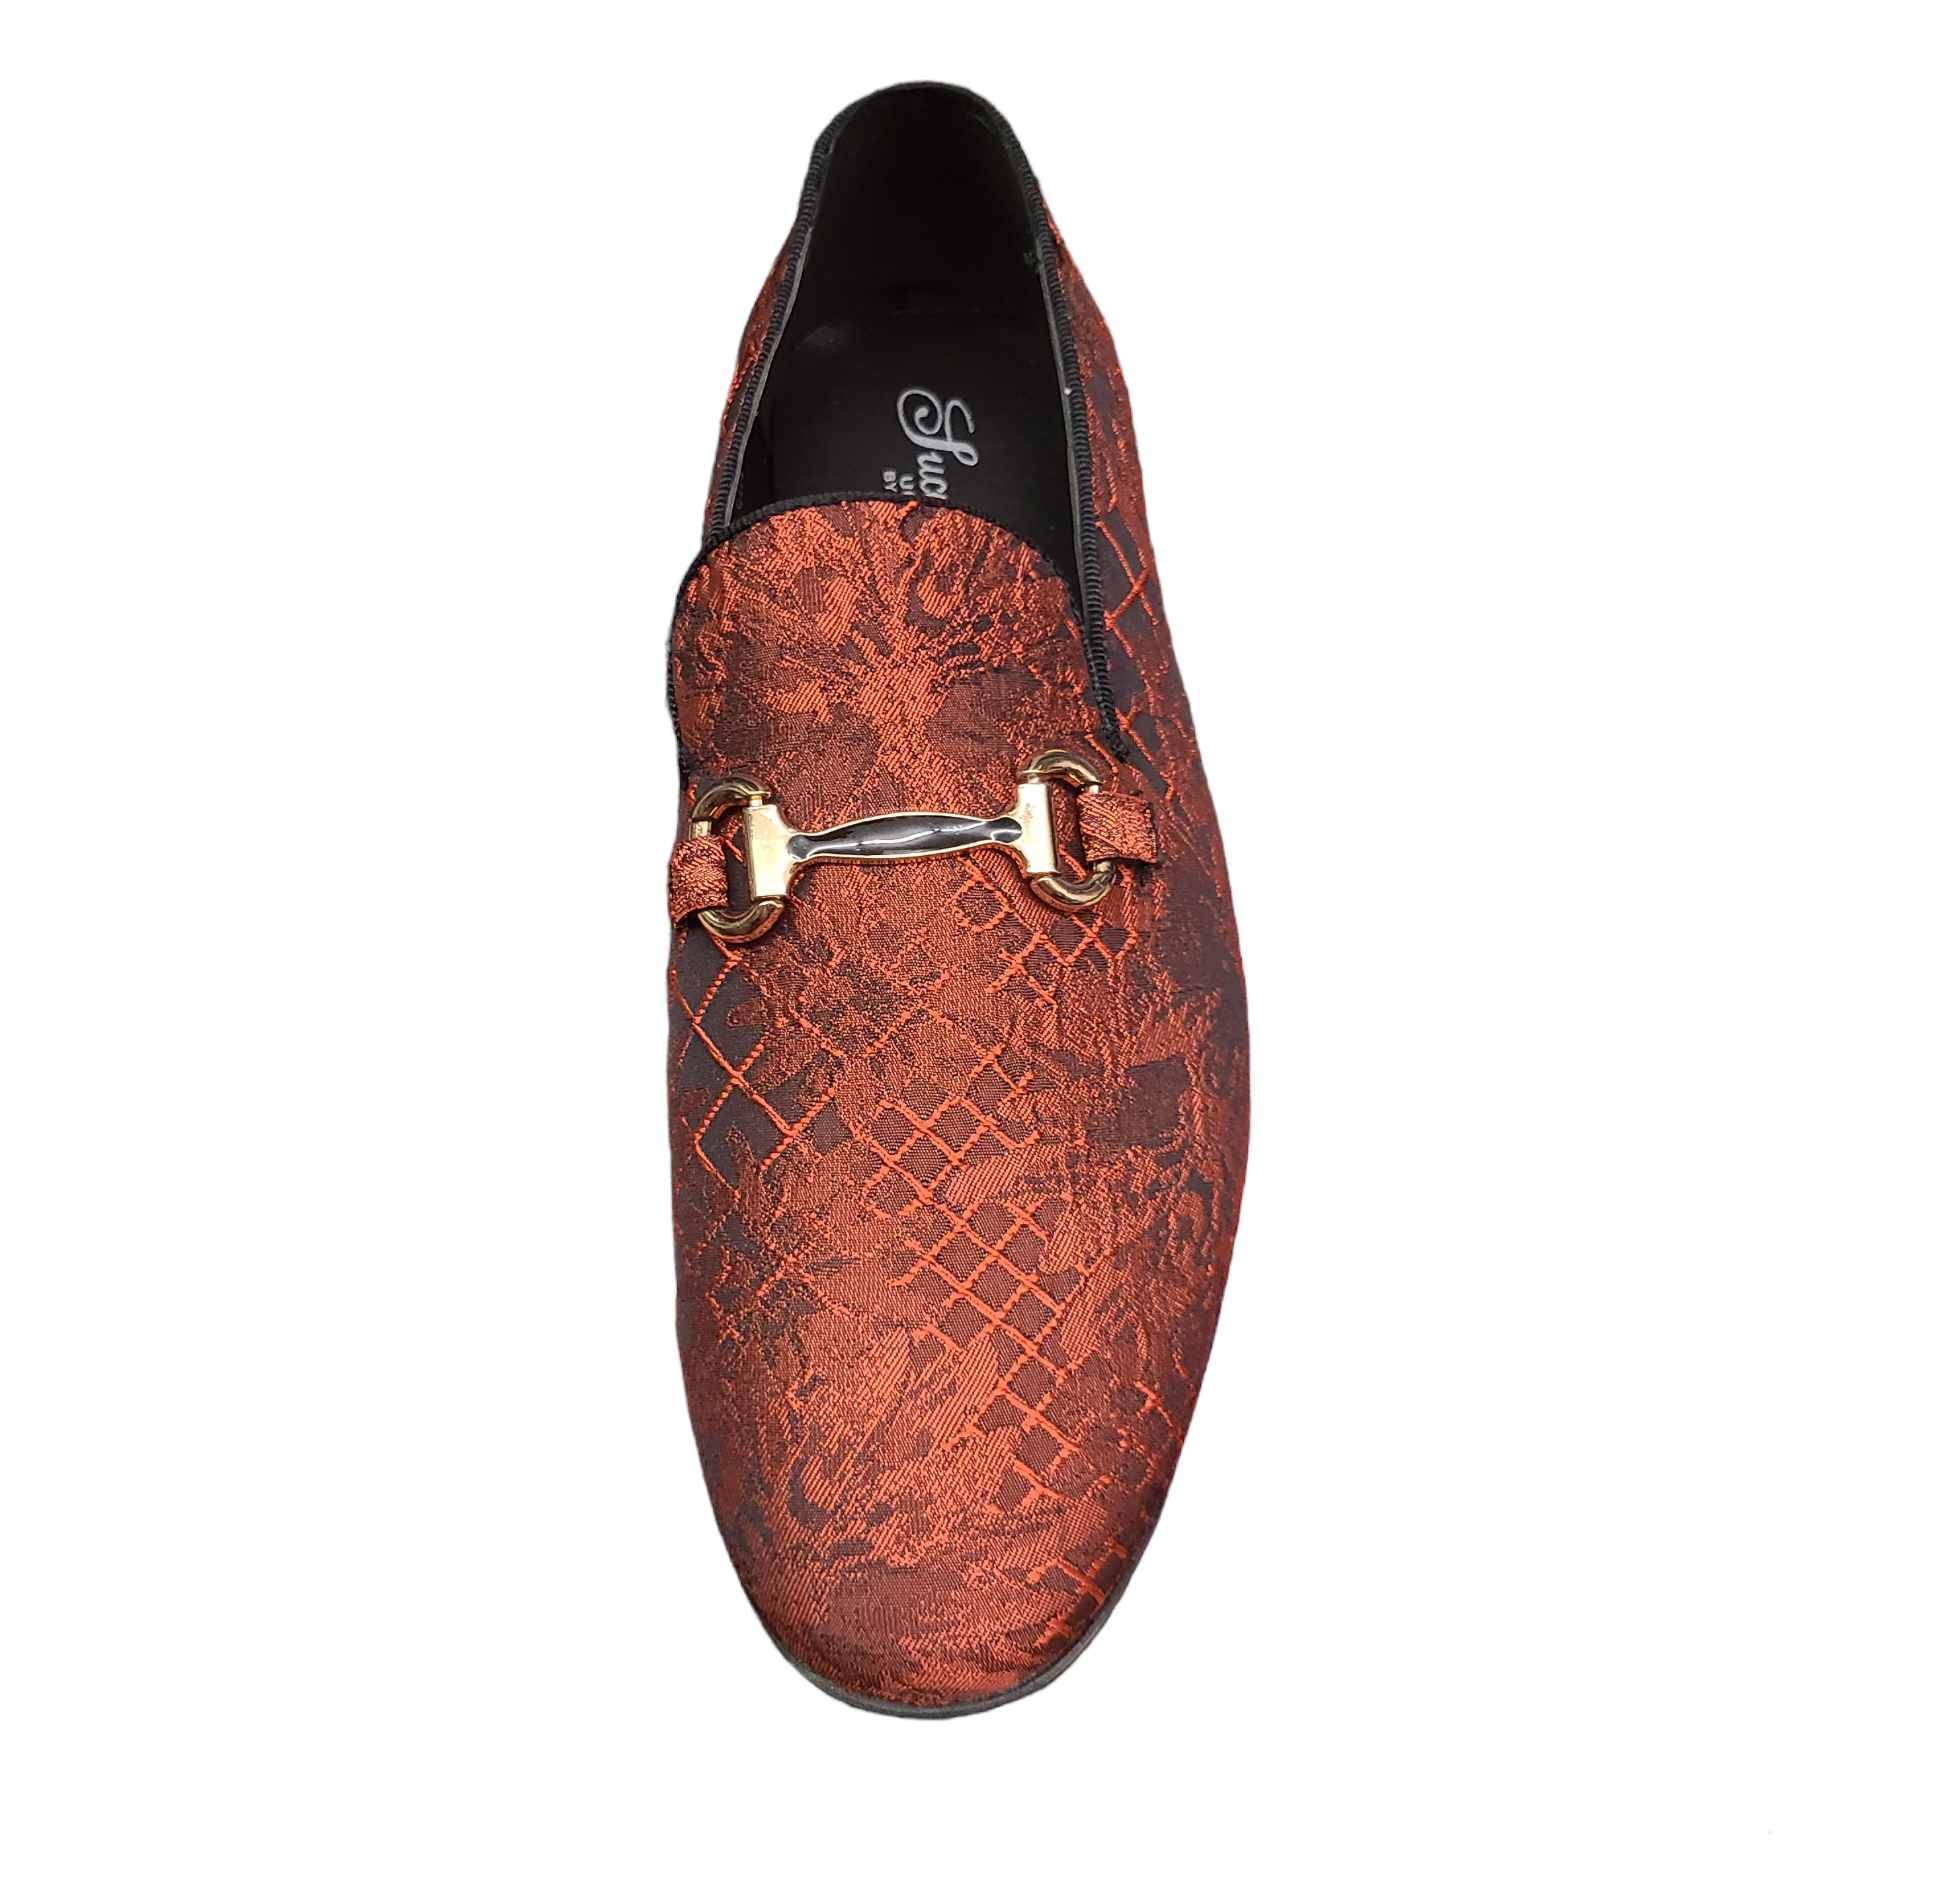 Luccesso Slip On Formal Shoes With Buckle